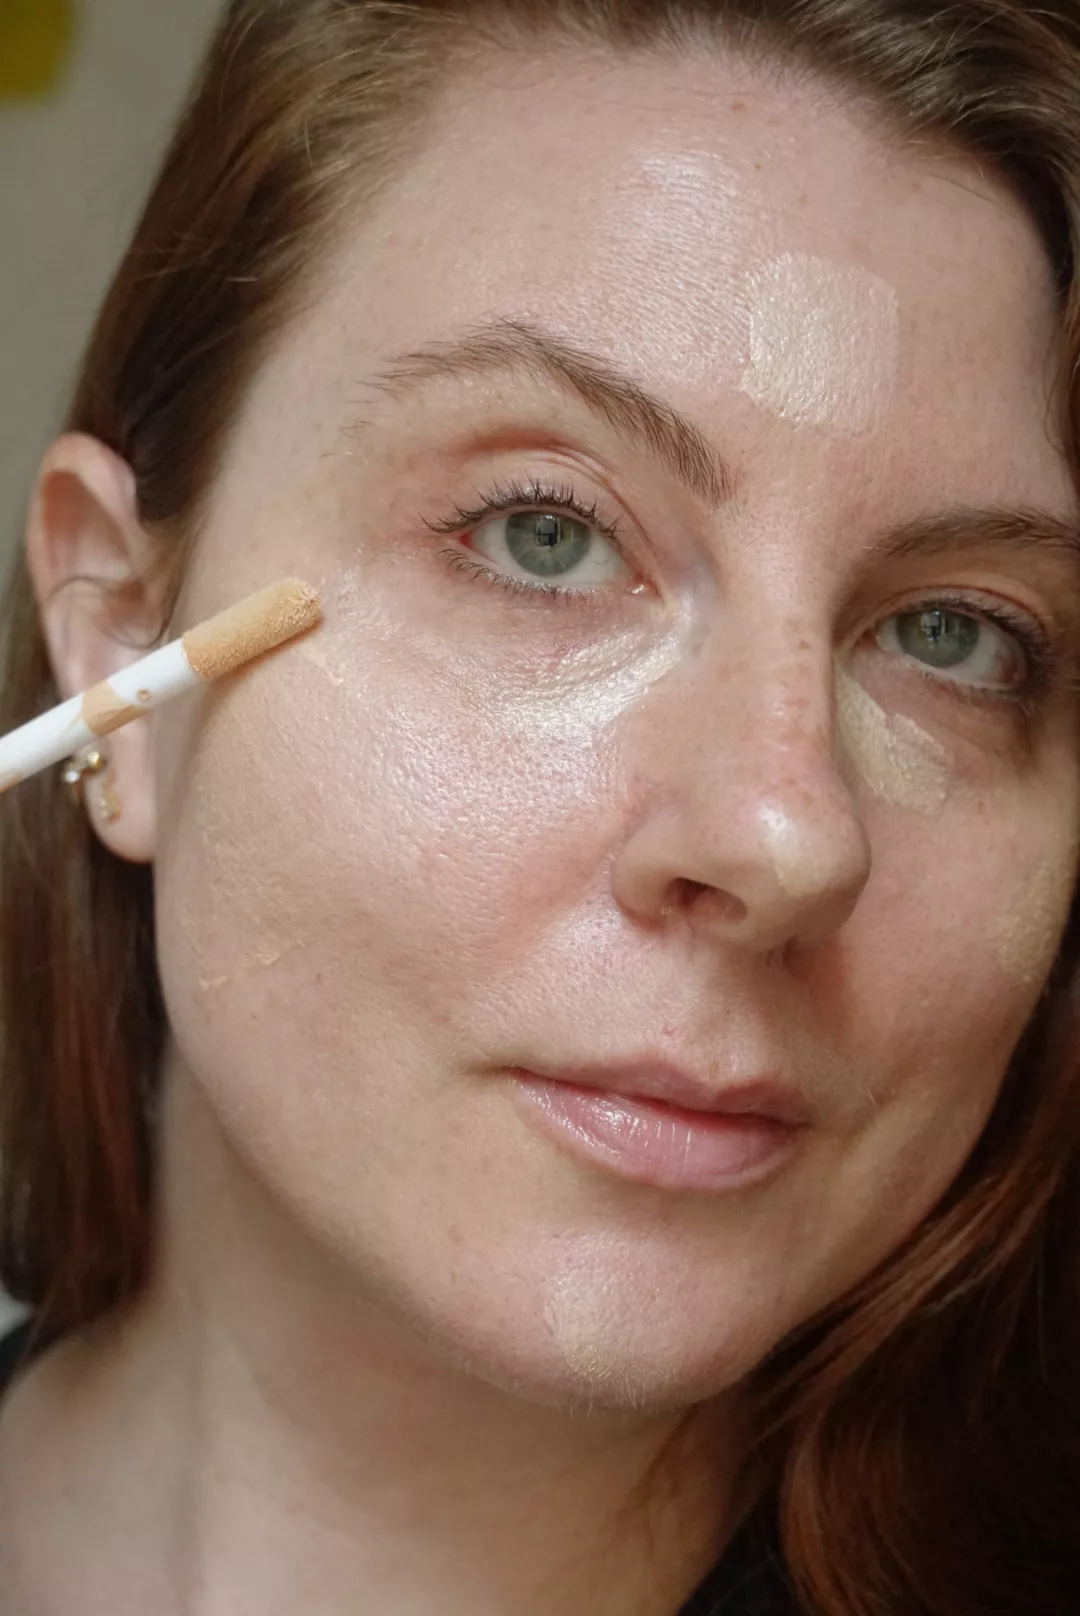 Makeup artist and Byrdie writer Ashley Rebecca applies highlighter to skin